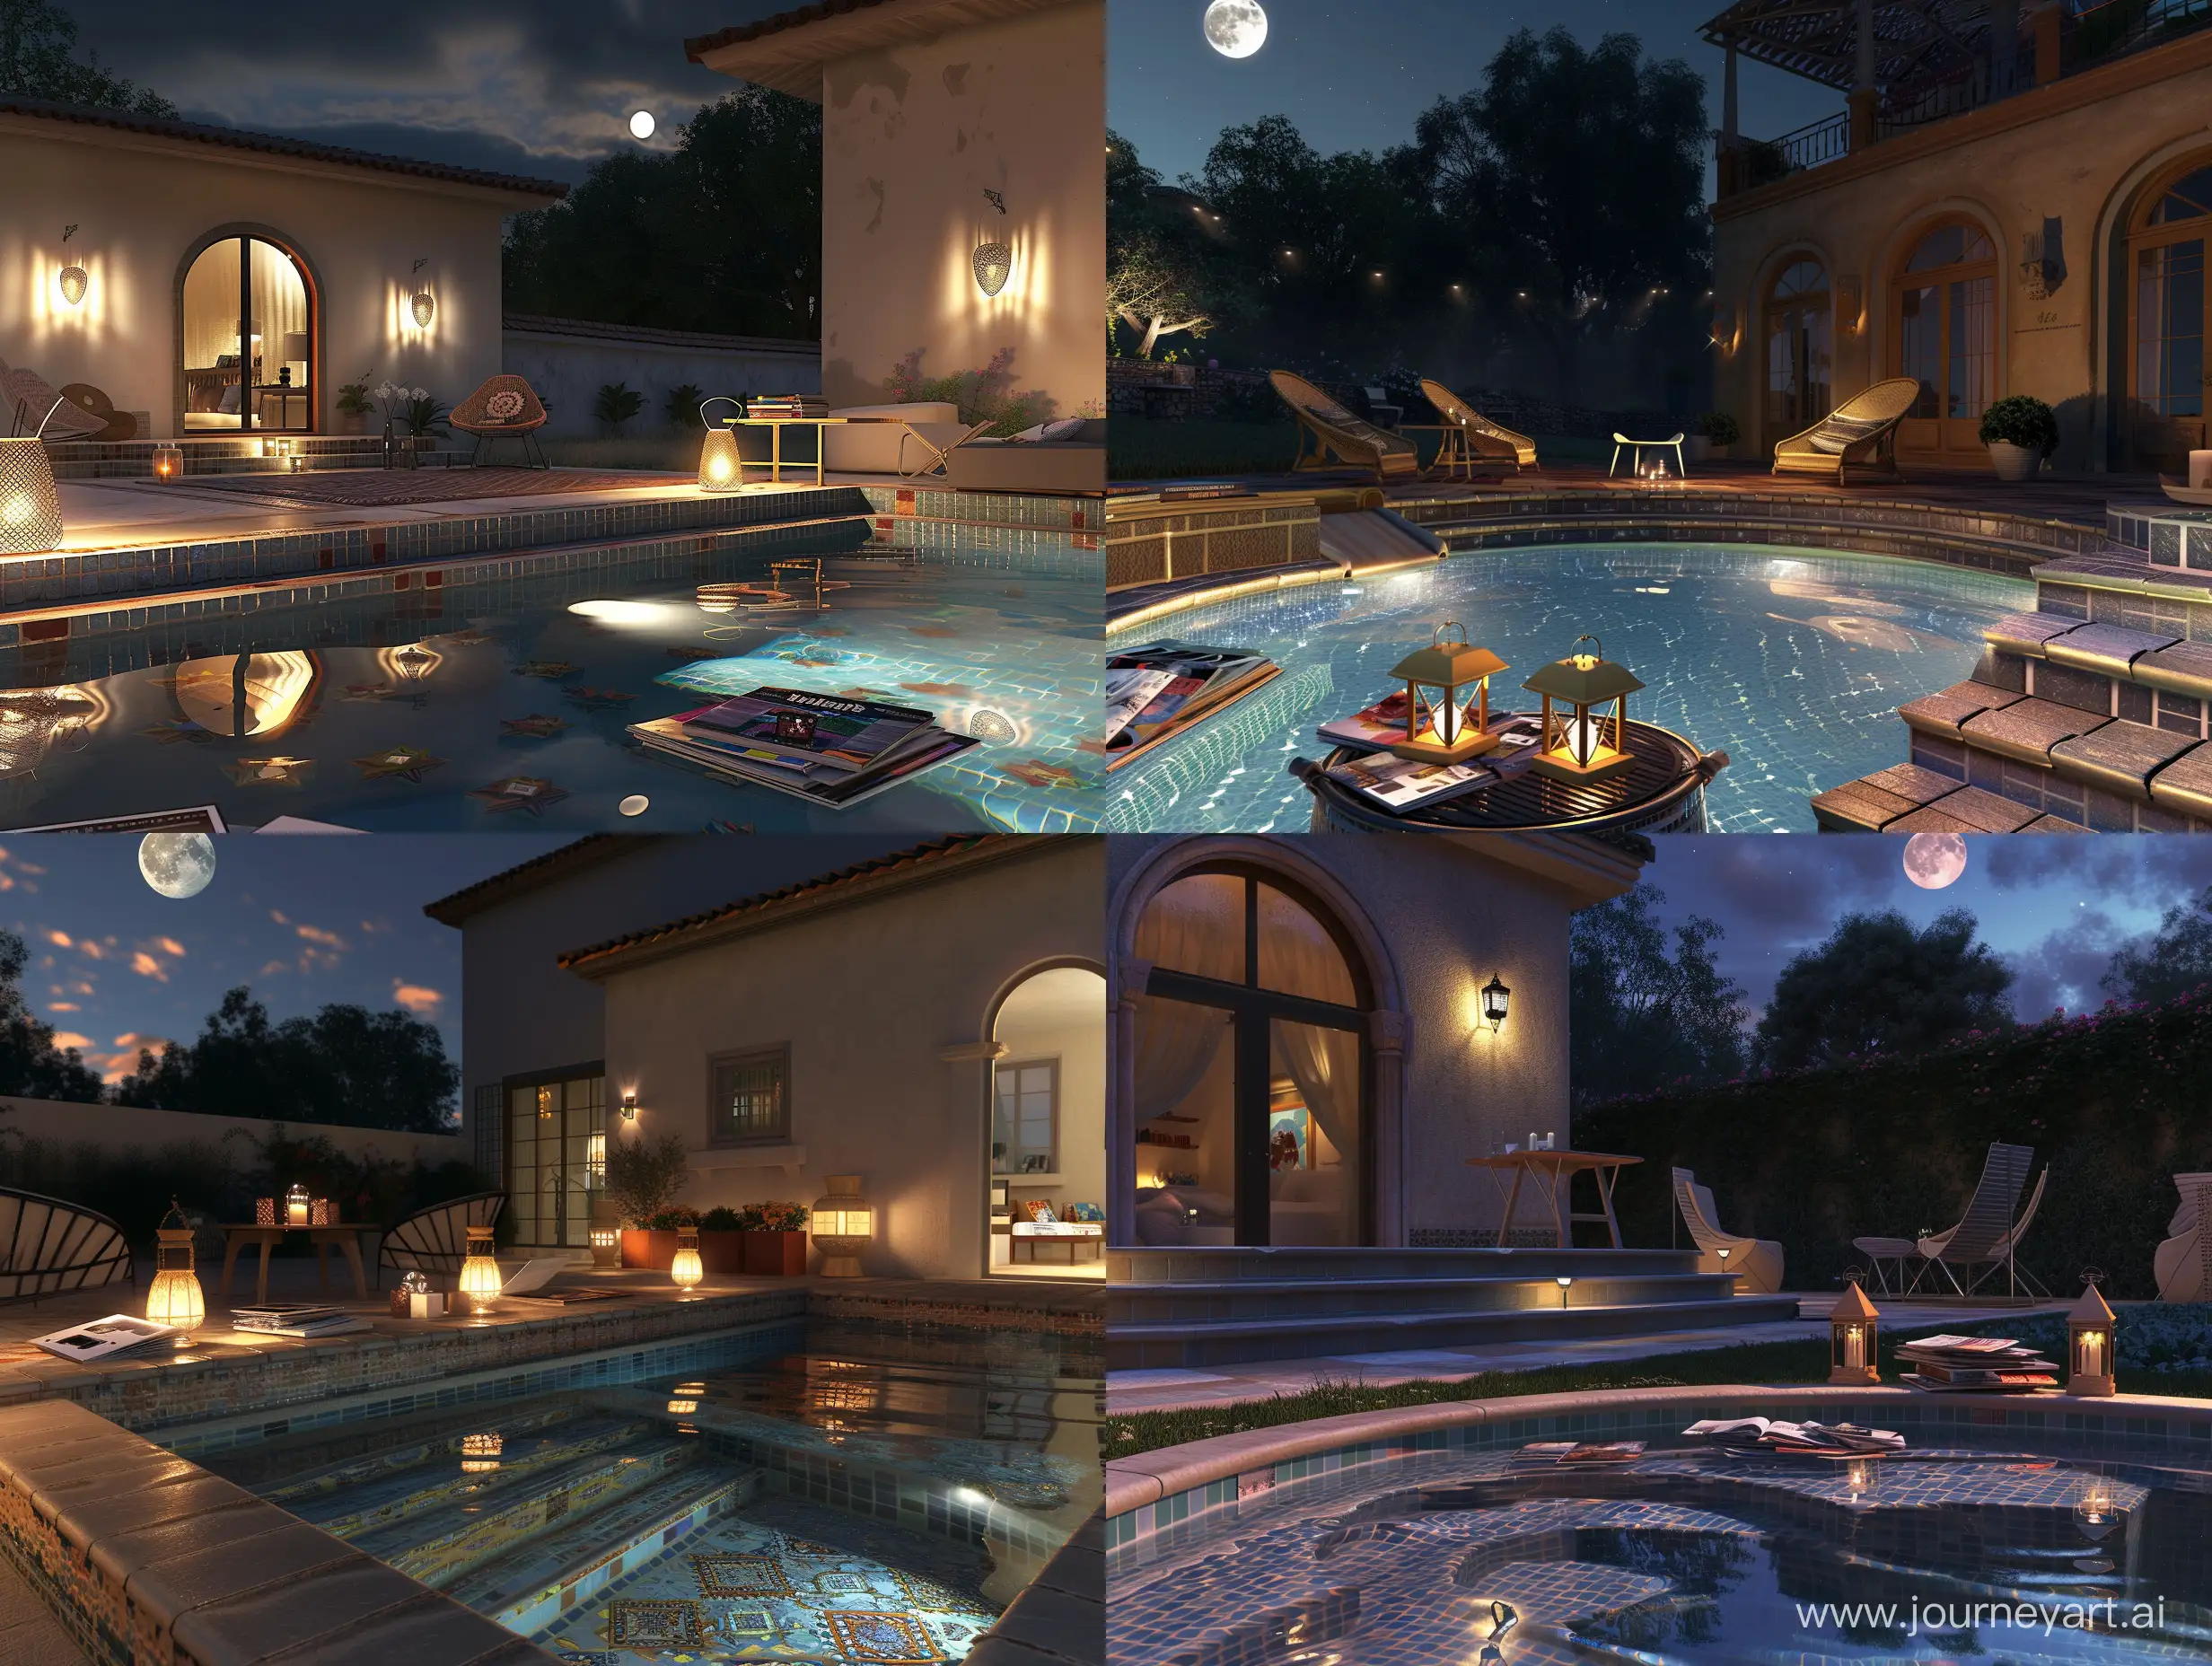 american large house at night. a backyard a small swimming pool, with beautiful edging, small tiled steps, desighned lanterns reflecting in the transparent water. near is a little table with magazines and candles. there are two design chairs near the table. 8 to ultrarealism, unreal engine, clear objects, beautiful night skies with moon, good compose 